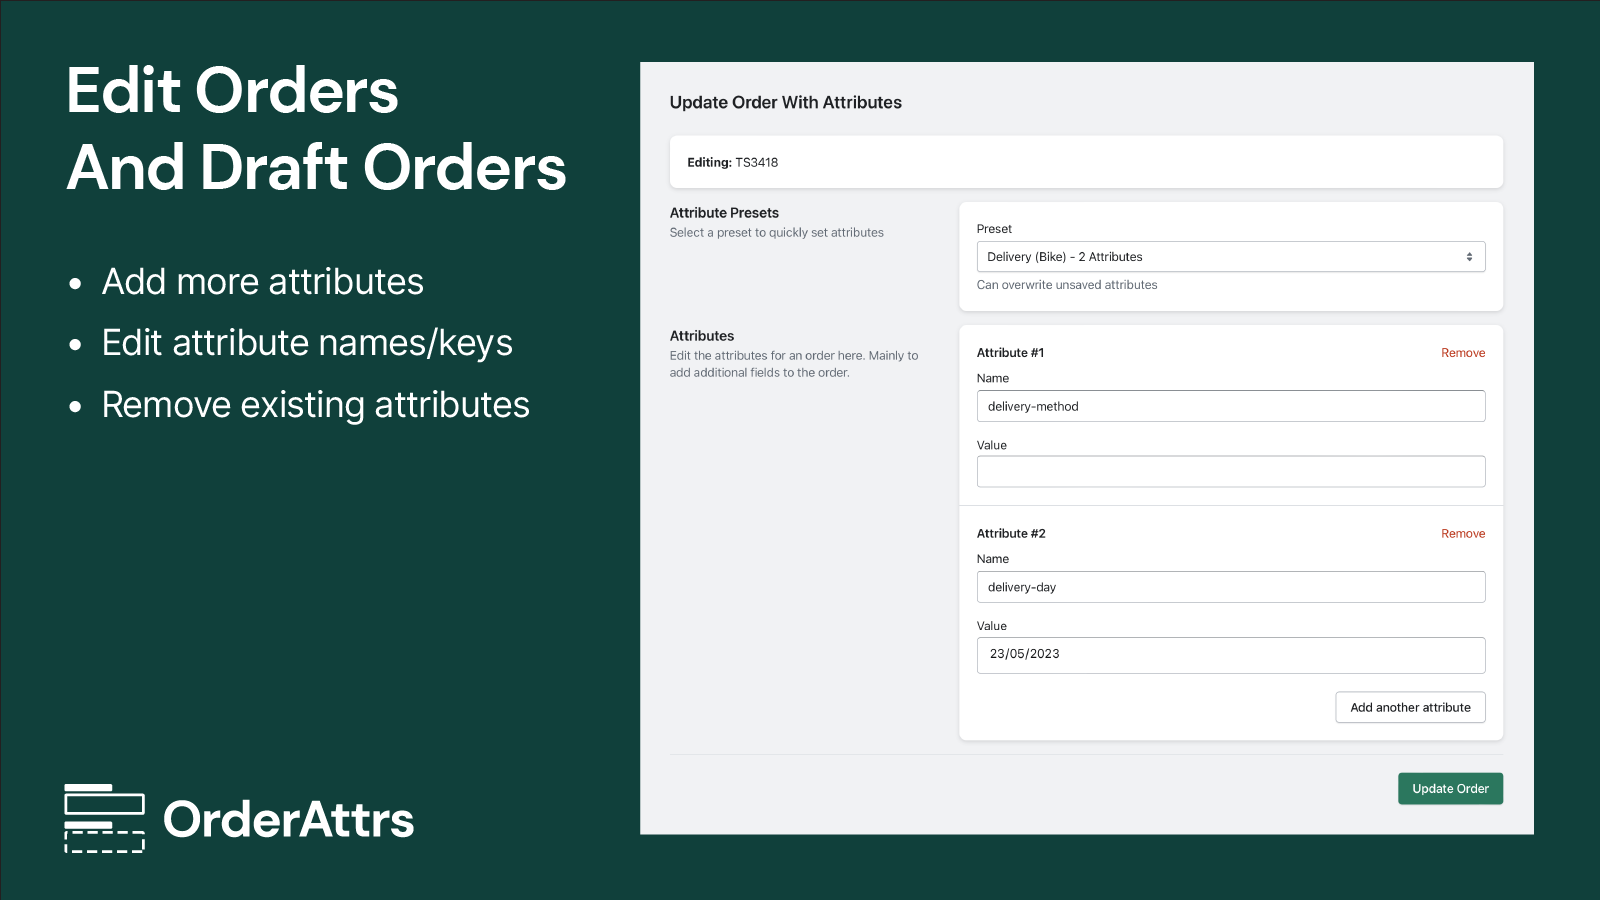 Edit attributes on existing orders and draft orders